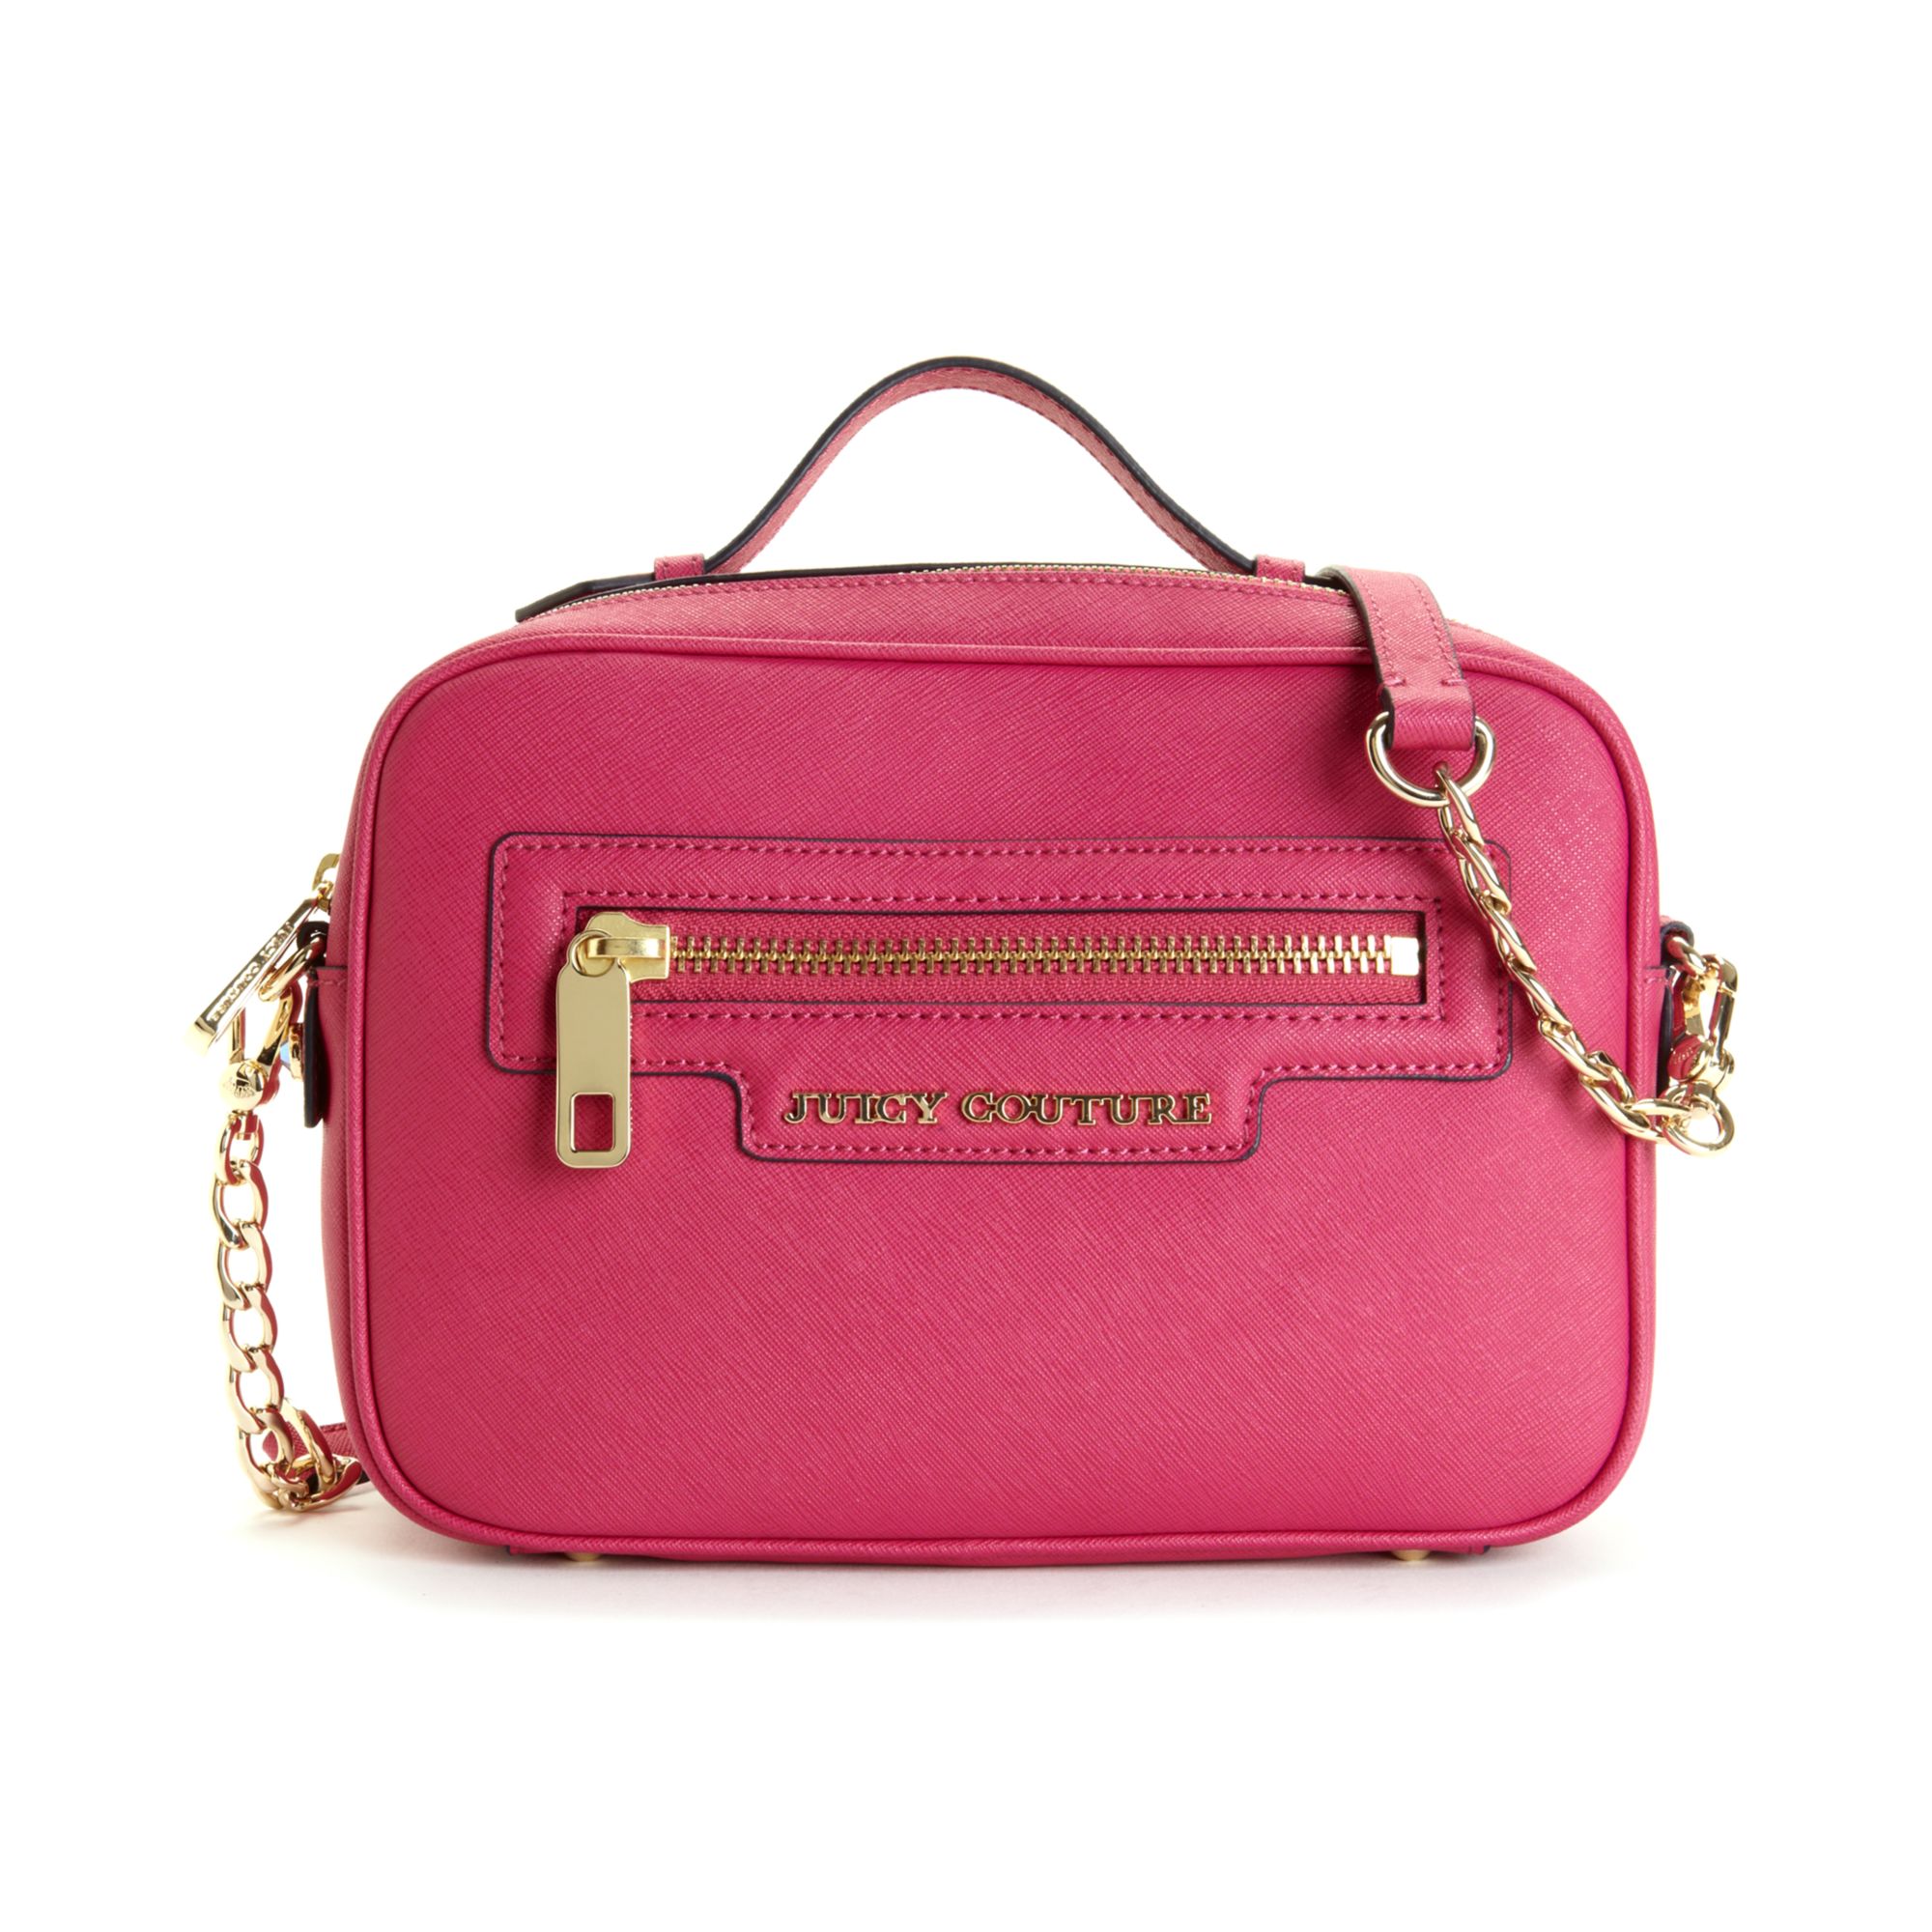 Juicy Couture Sophia Mini Luggage Satchel in Pink (Cashmere Rose) | Lyst